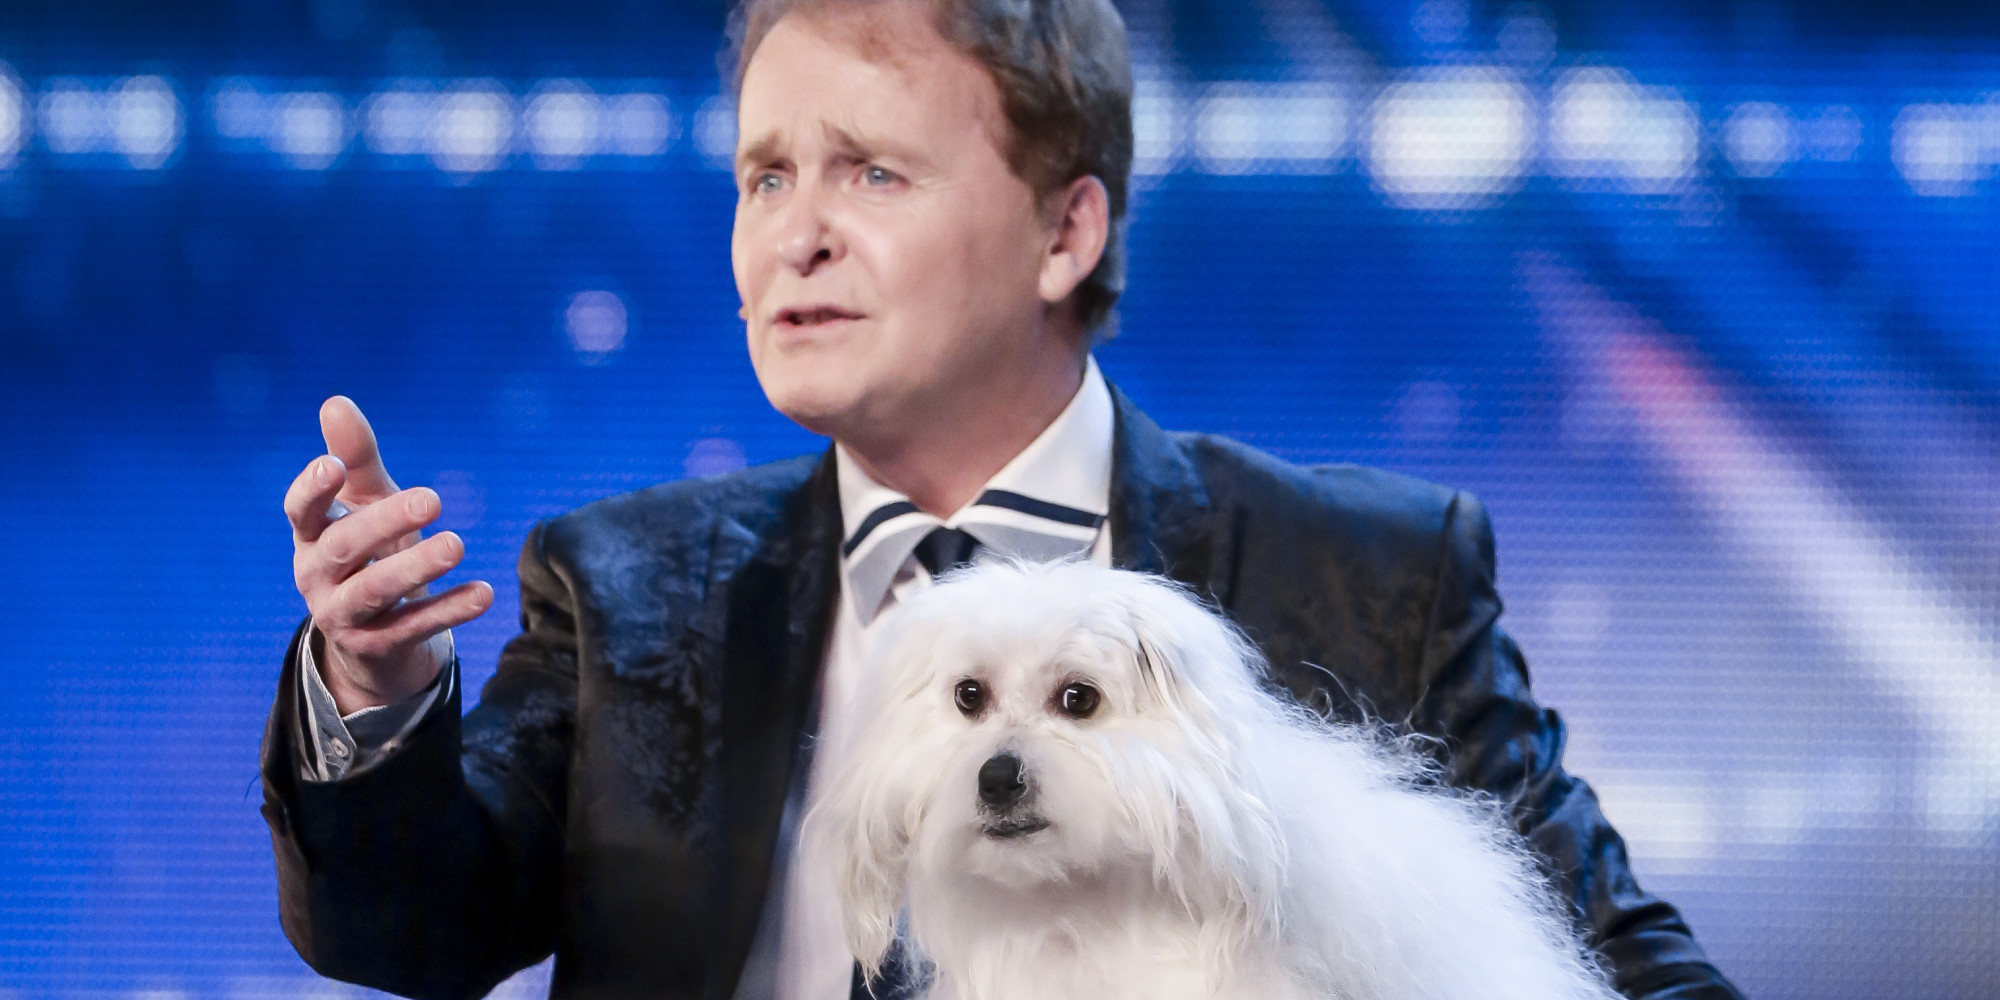 ‘Britain's Got Talent' Ventriloquist Dog Act To Be Investigated Over